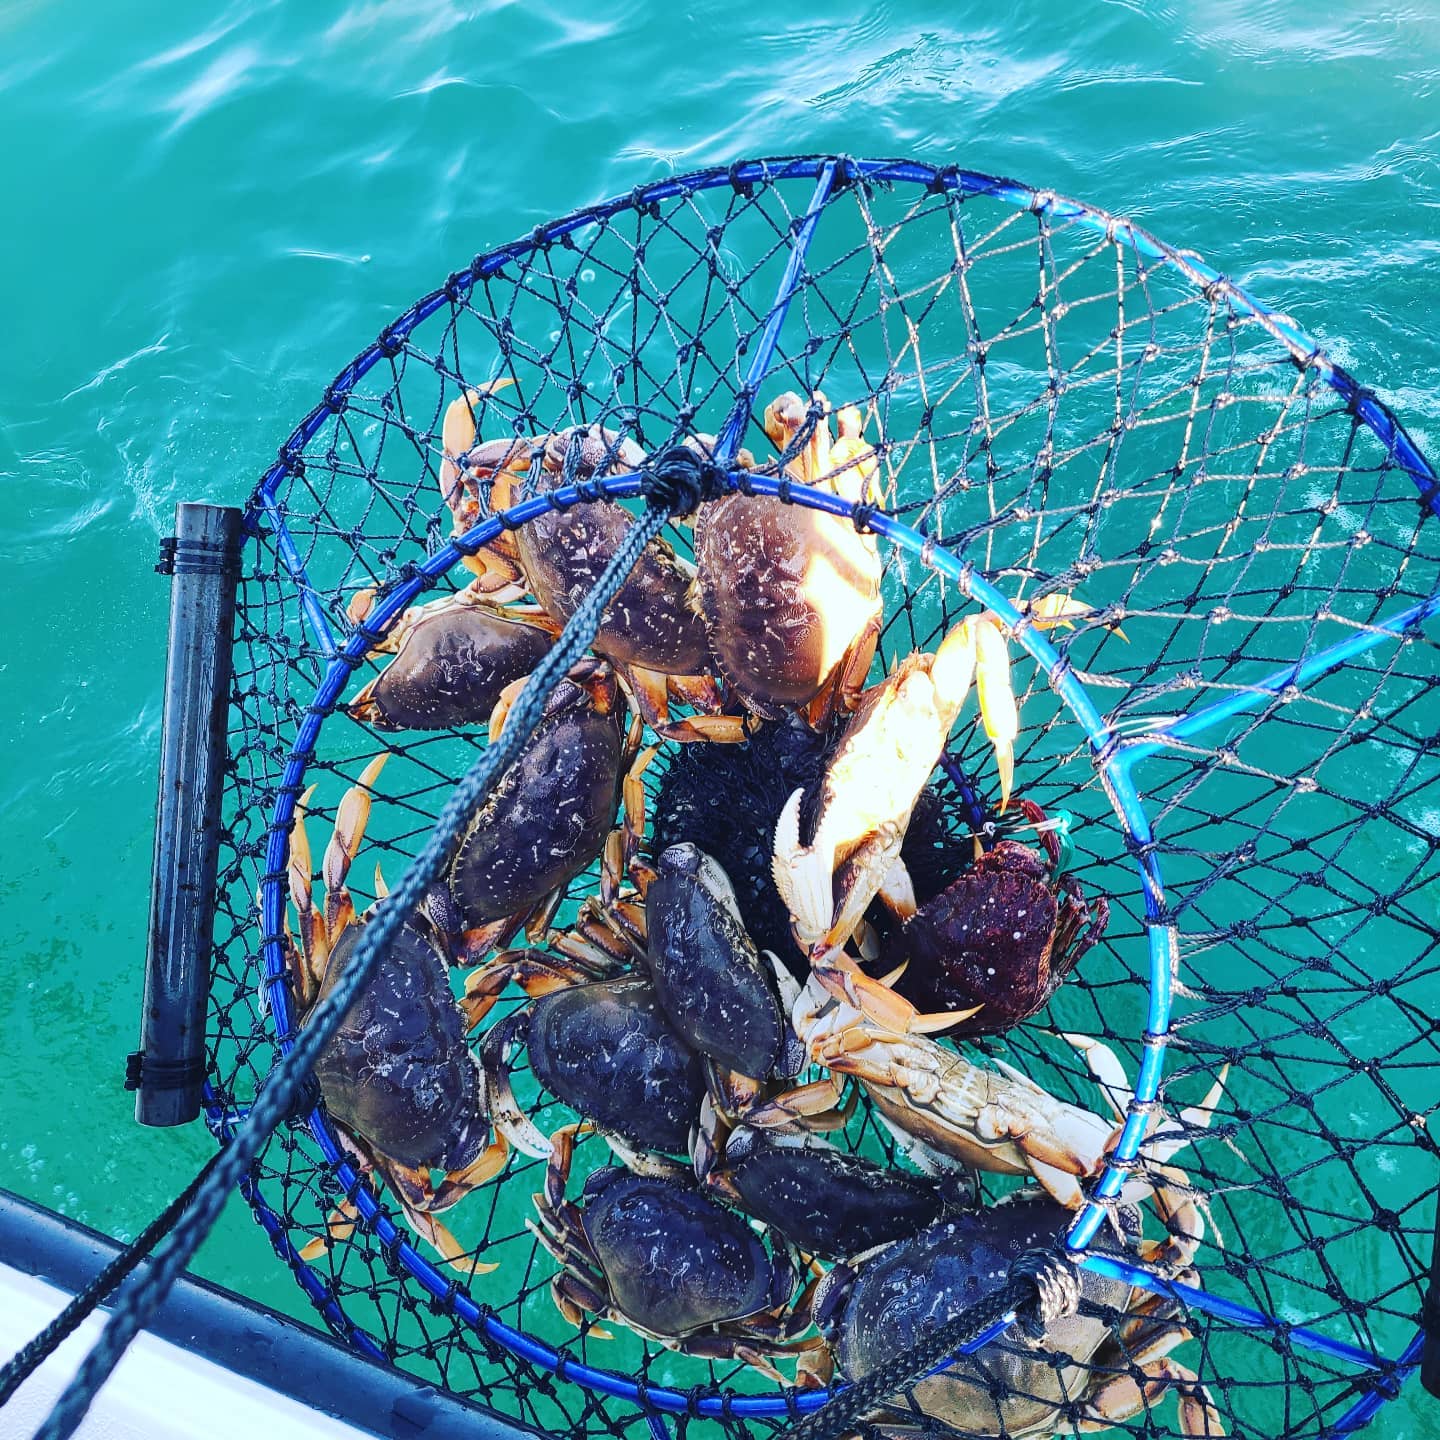 https://wonews.com/wp-content/uploads/2021/11/Hoop-net-Dungeness-crab-on-the-Reel-Obsession-out-of-Bodega-Bay.jpg